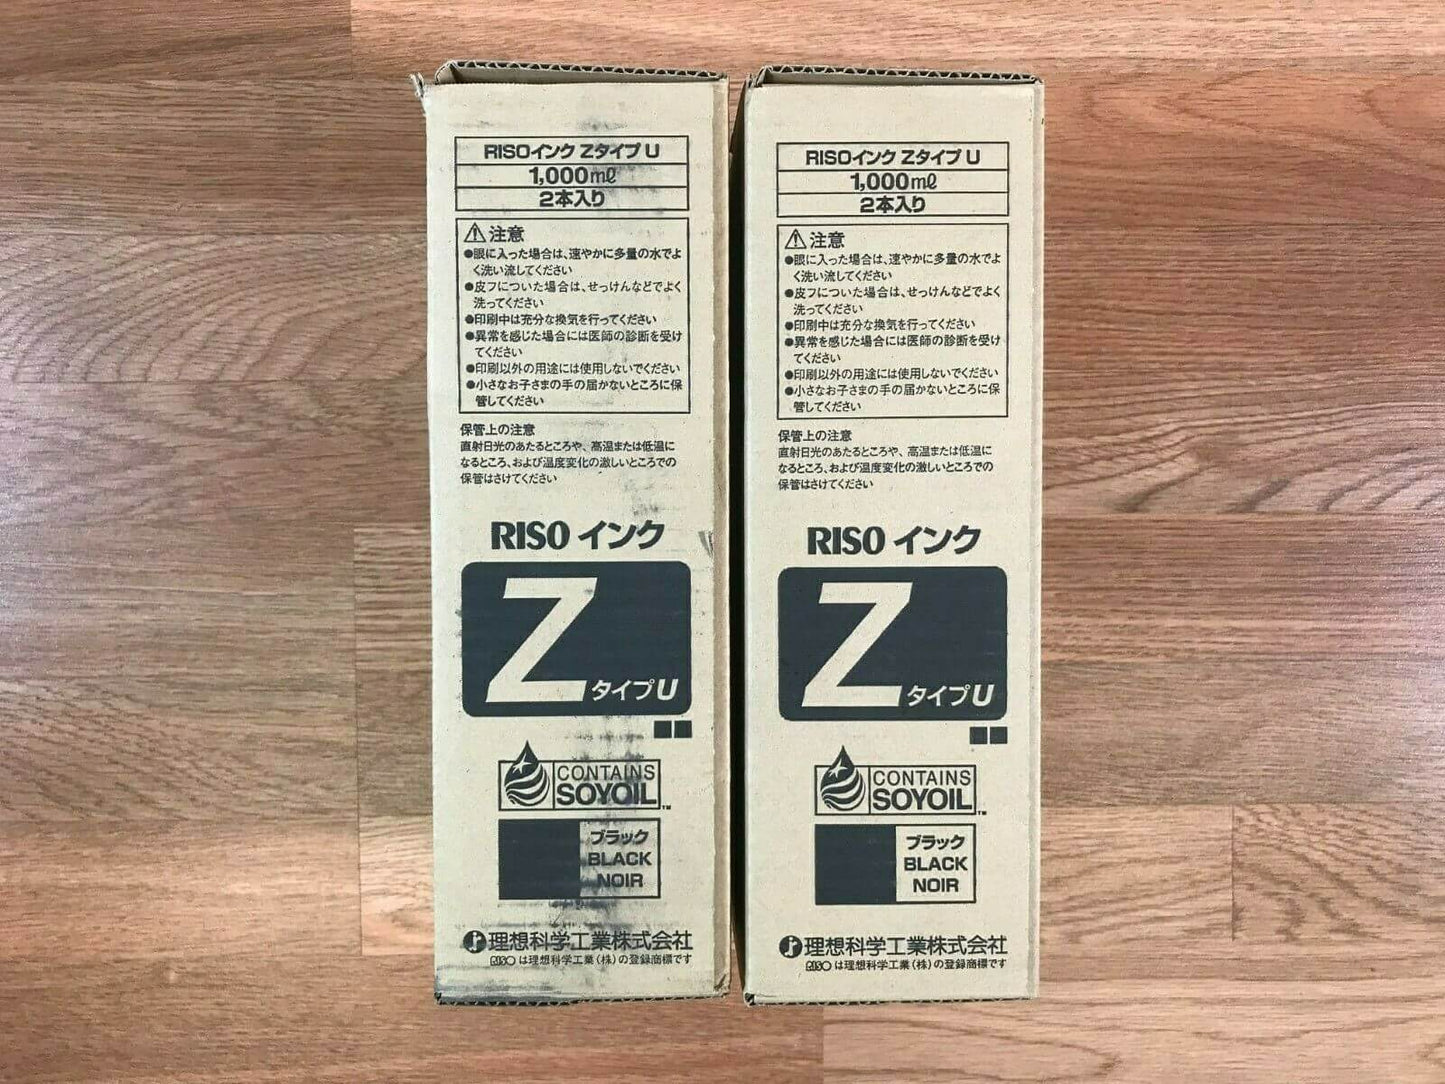 2 Genuine Riso Black Ink S-7605 Z typeU 2 Cartridges Per Box Same Day Shipping!! - copier-clearance-center